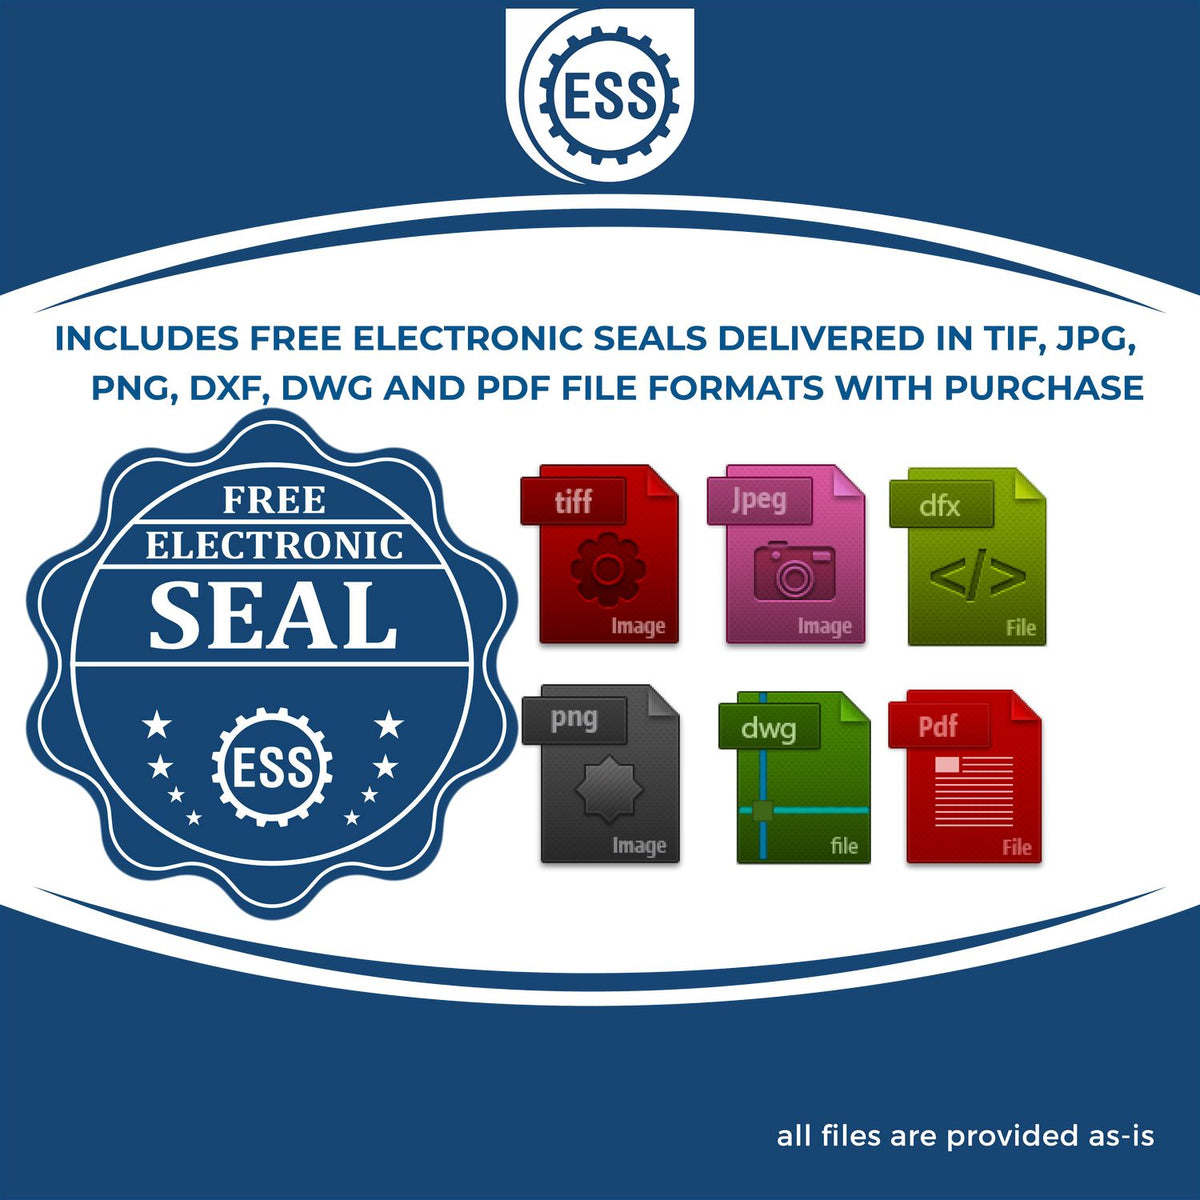 An infographic for the free electronic seal for the North Dakota Engineer Desk Seal illustrating the different file type icons such as DXF, DWG, TIF, JPG and PNG.